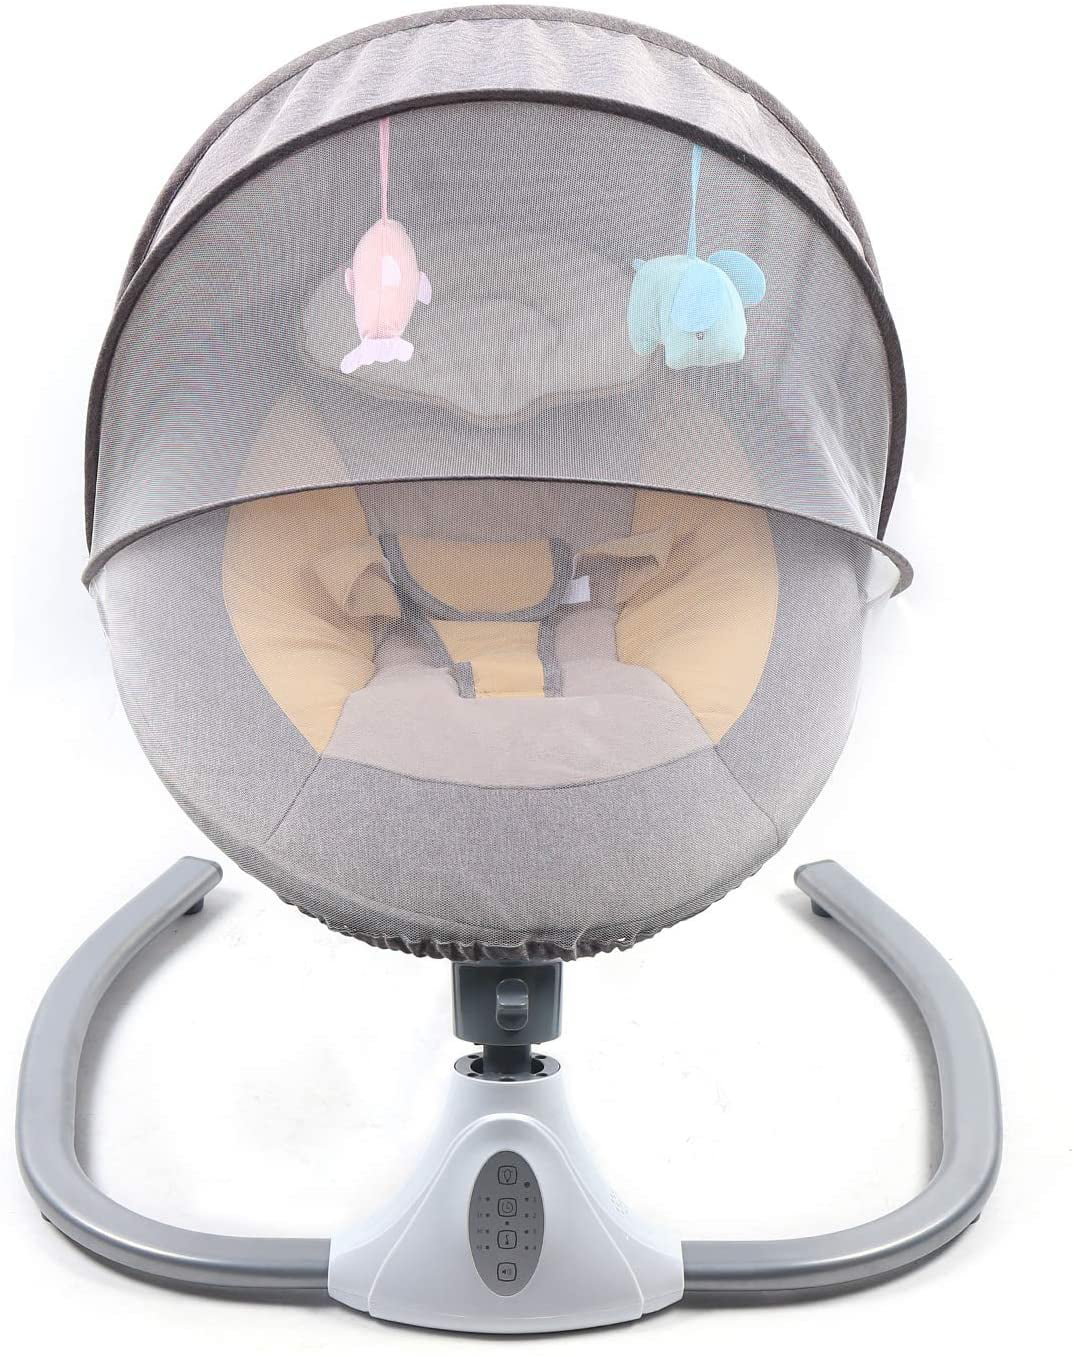 TFCFL Electric Baby Swing Rocking Chair,With Bluetooth Remote Control,USB  and Music Player,4-speed Newborn Bouncer(Grey) 